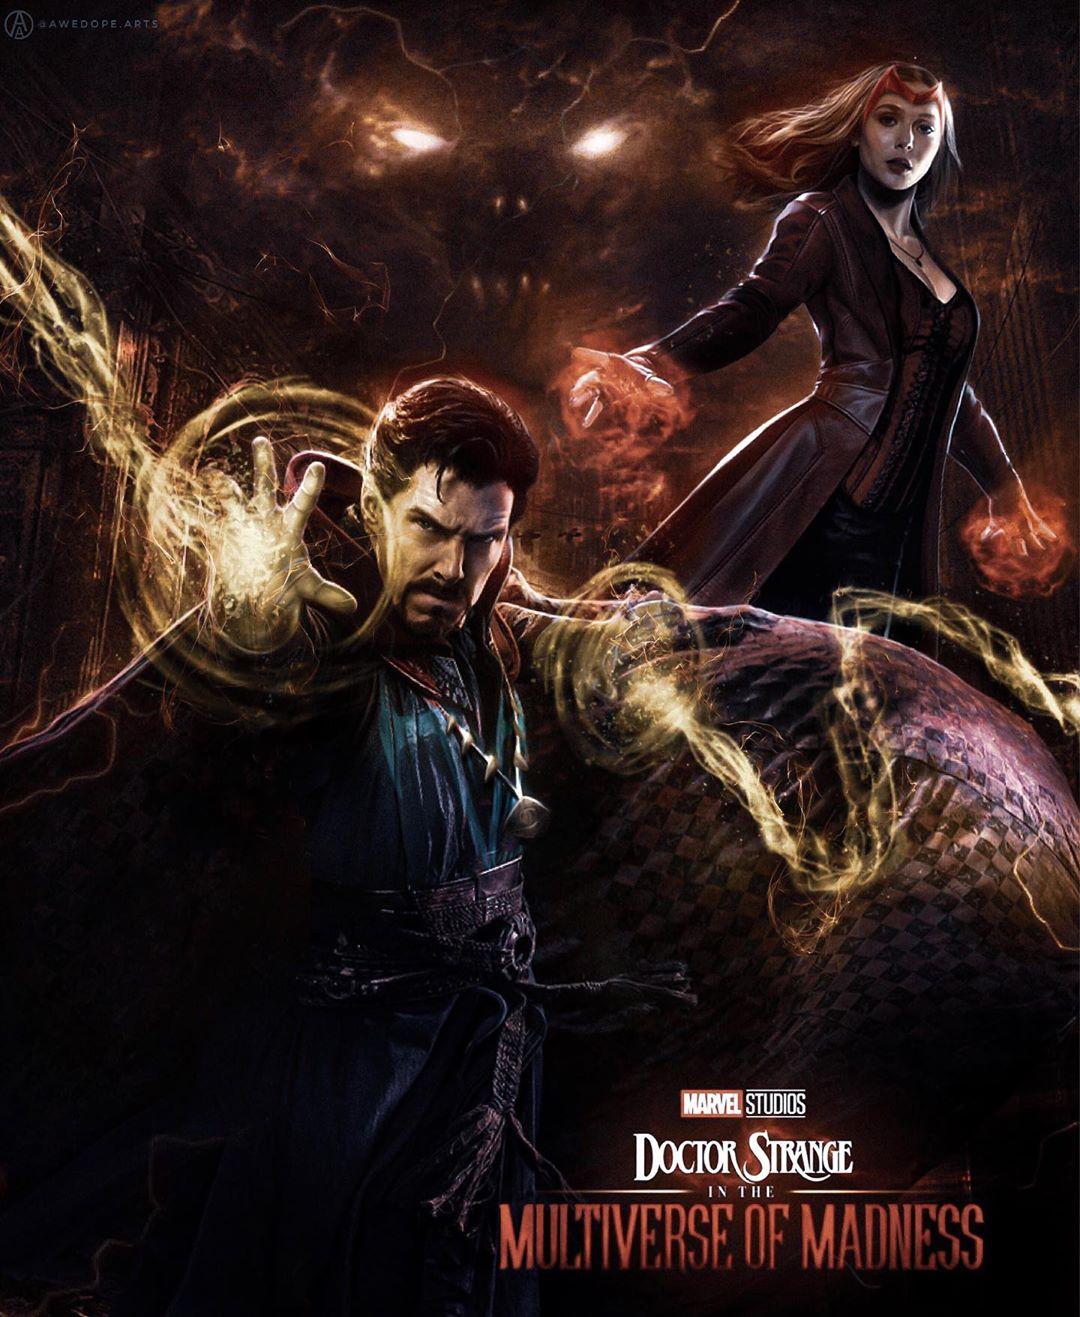 Doctor Strange In The Multiverse Of Madness fan poster by Awedope